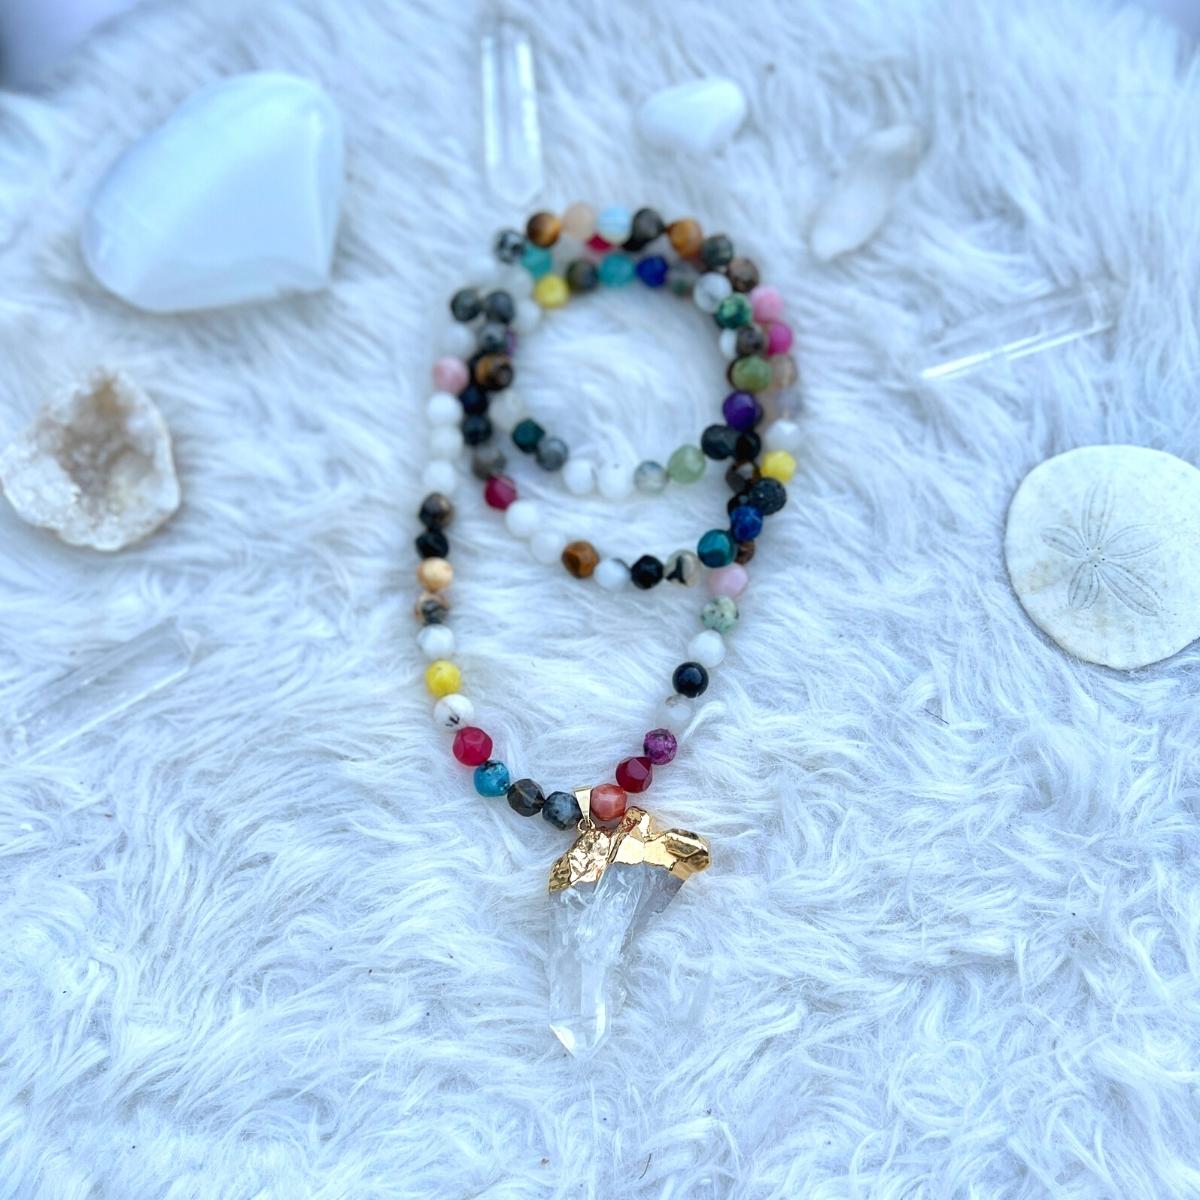 The Master Healer Crystal Necklace with Healing Gemstones -  Mother Earth Energy Healing Crystal Mindfulness Gemstone Necklace with a Clear Crystal Point to support change that comes from within. ONLY ONE AVAILABLE. This is truly a one of a kind piece. 